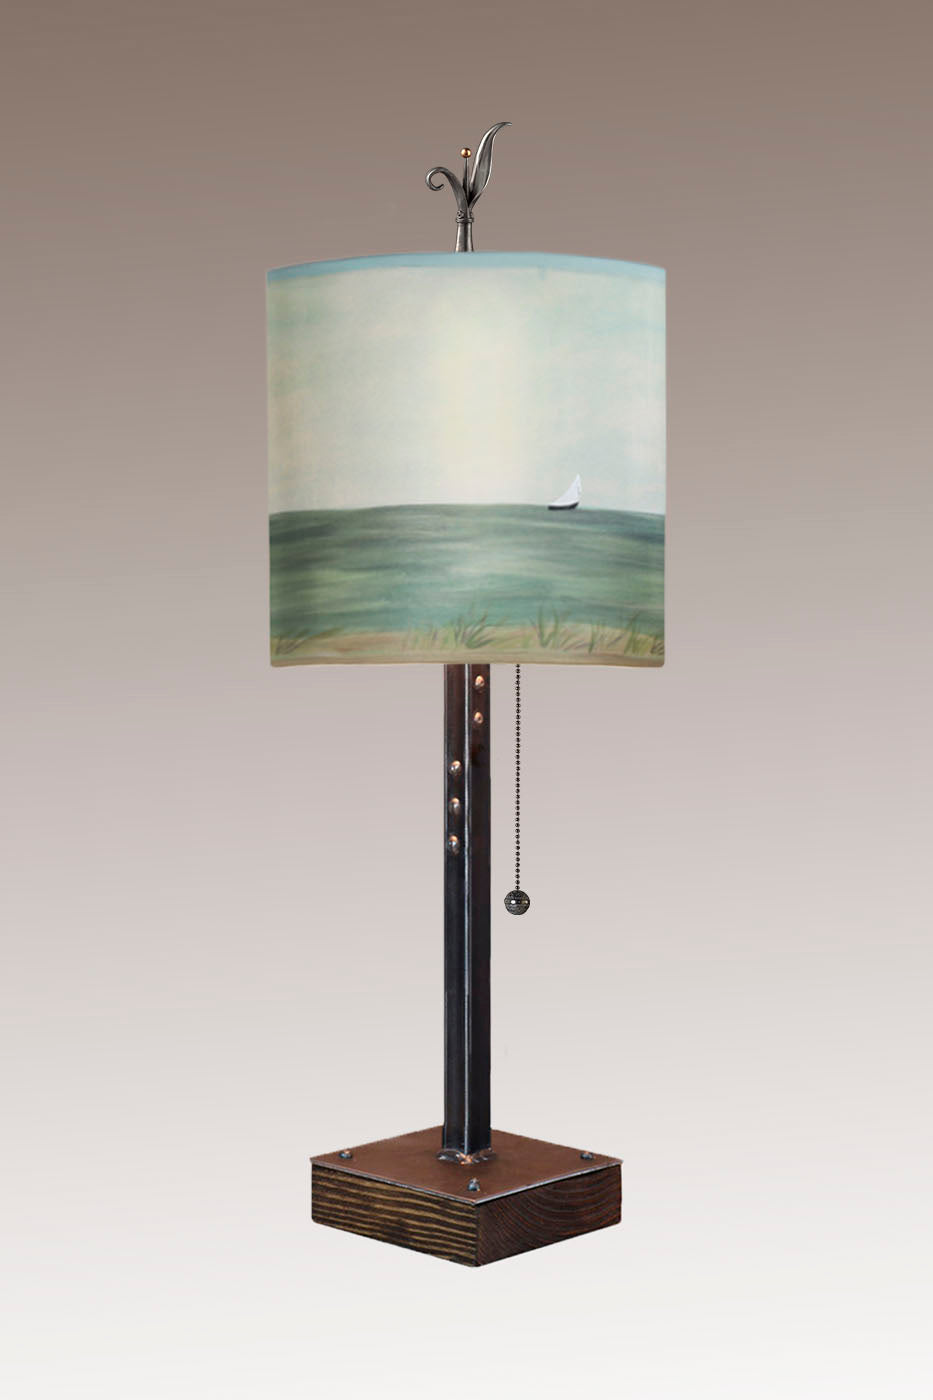 Janna Ugone & Co Table Lamps Steel Table Lamp on Wood with Medium Drum Shade in Shore